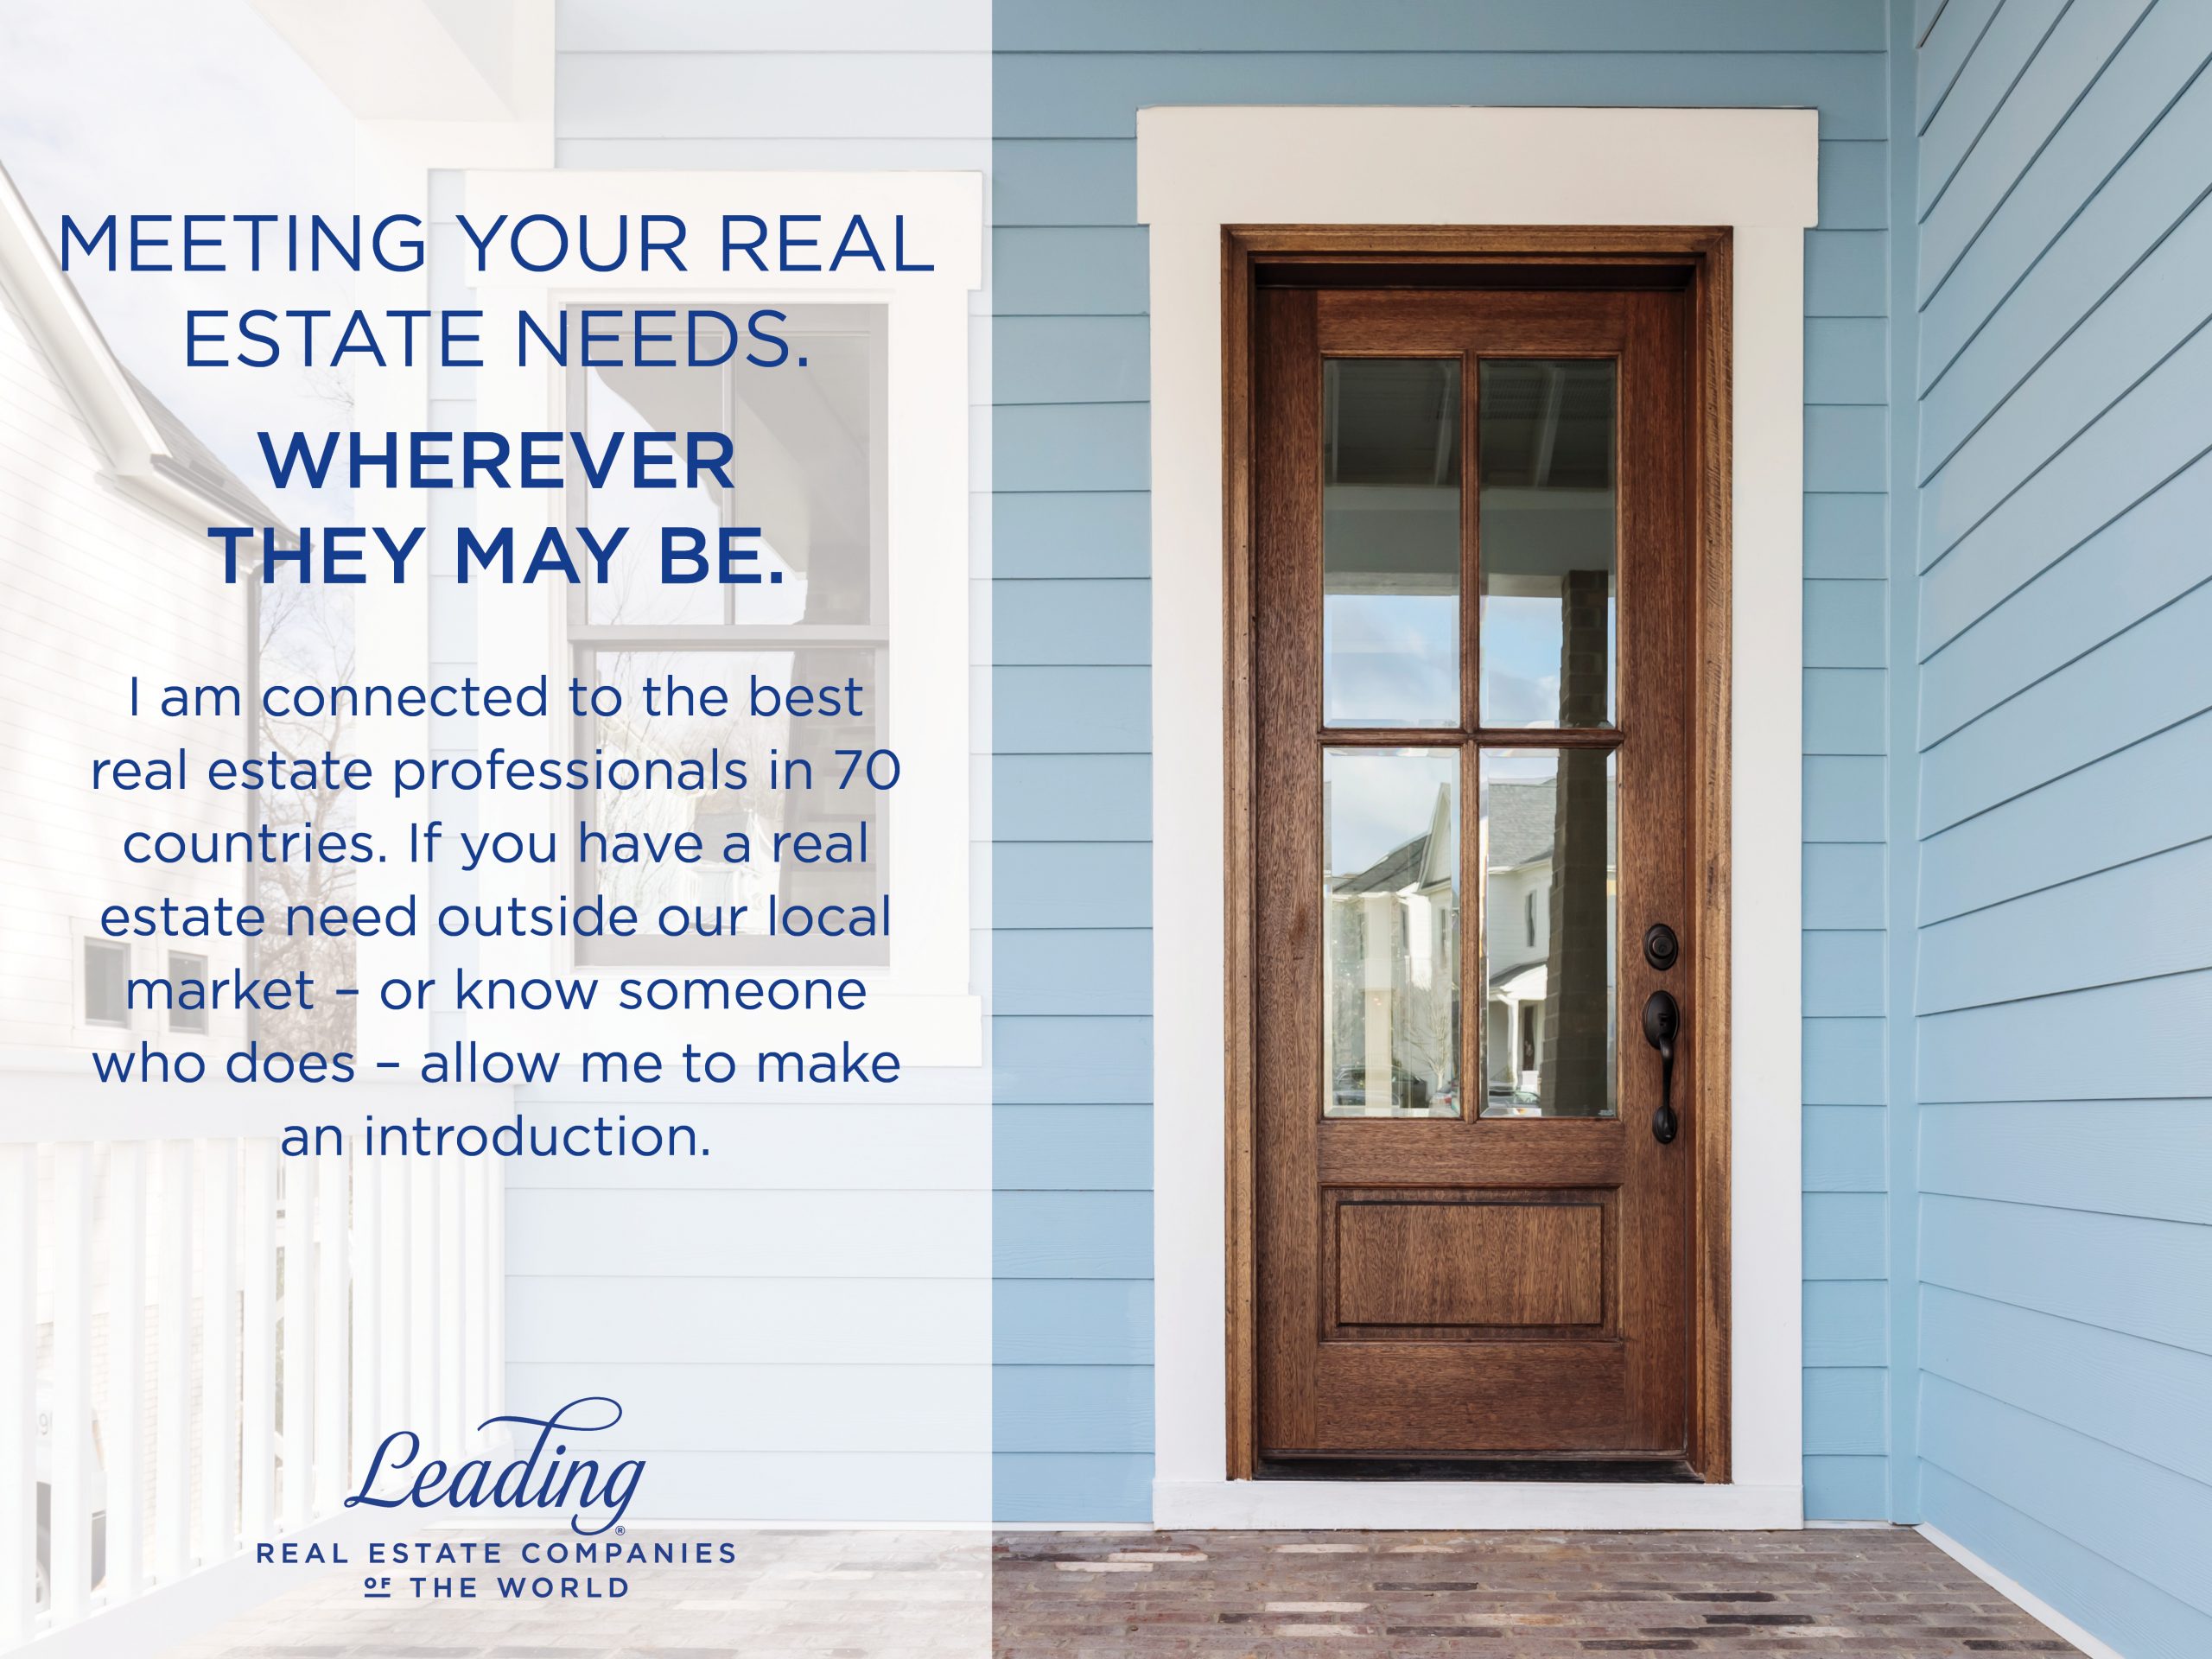 I can help you find a great Realtor anywhere in the world. Let me know if you or anyone you know is moving.